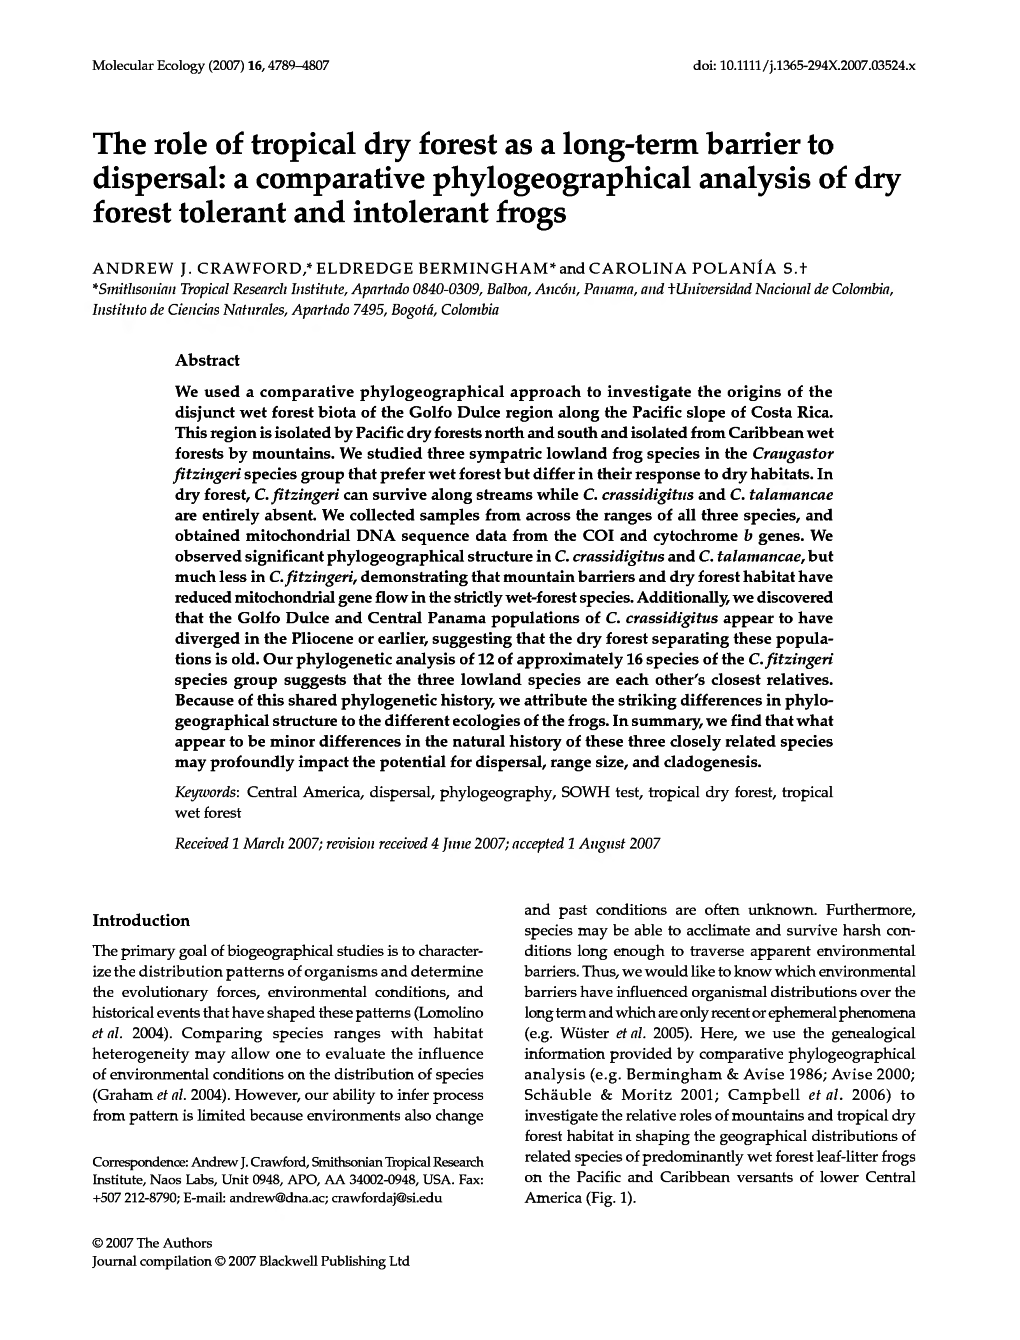 The Role of Tropical Dry Forest As a Long-Term Barrier to Dispersal: a Comparative Phylogeographical Analysis of Dry Forest Tolerant and Intolerant Frogs